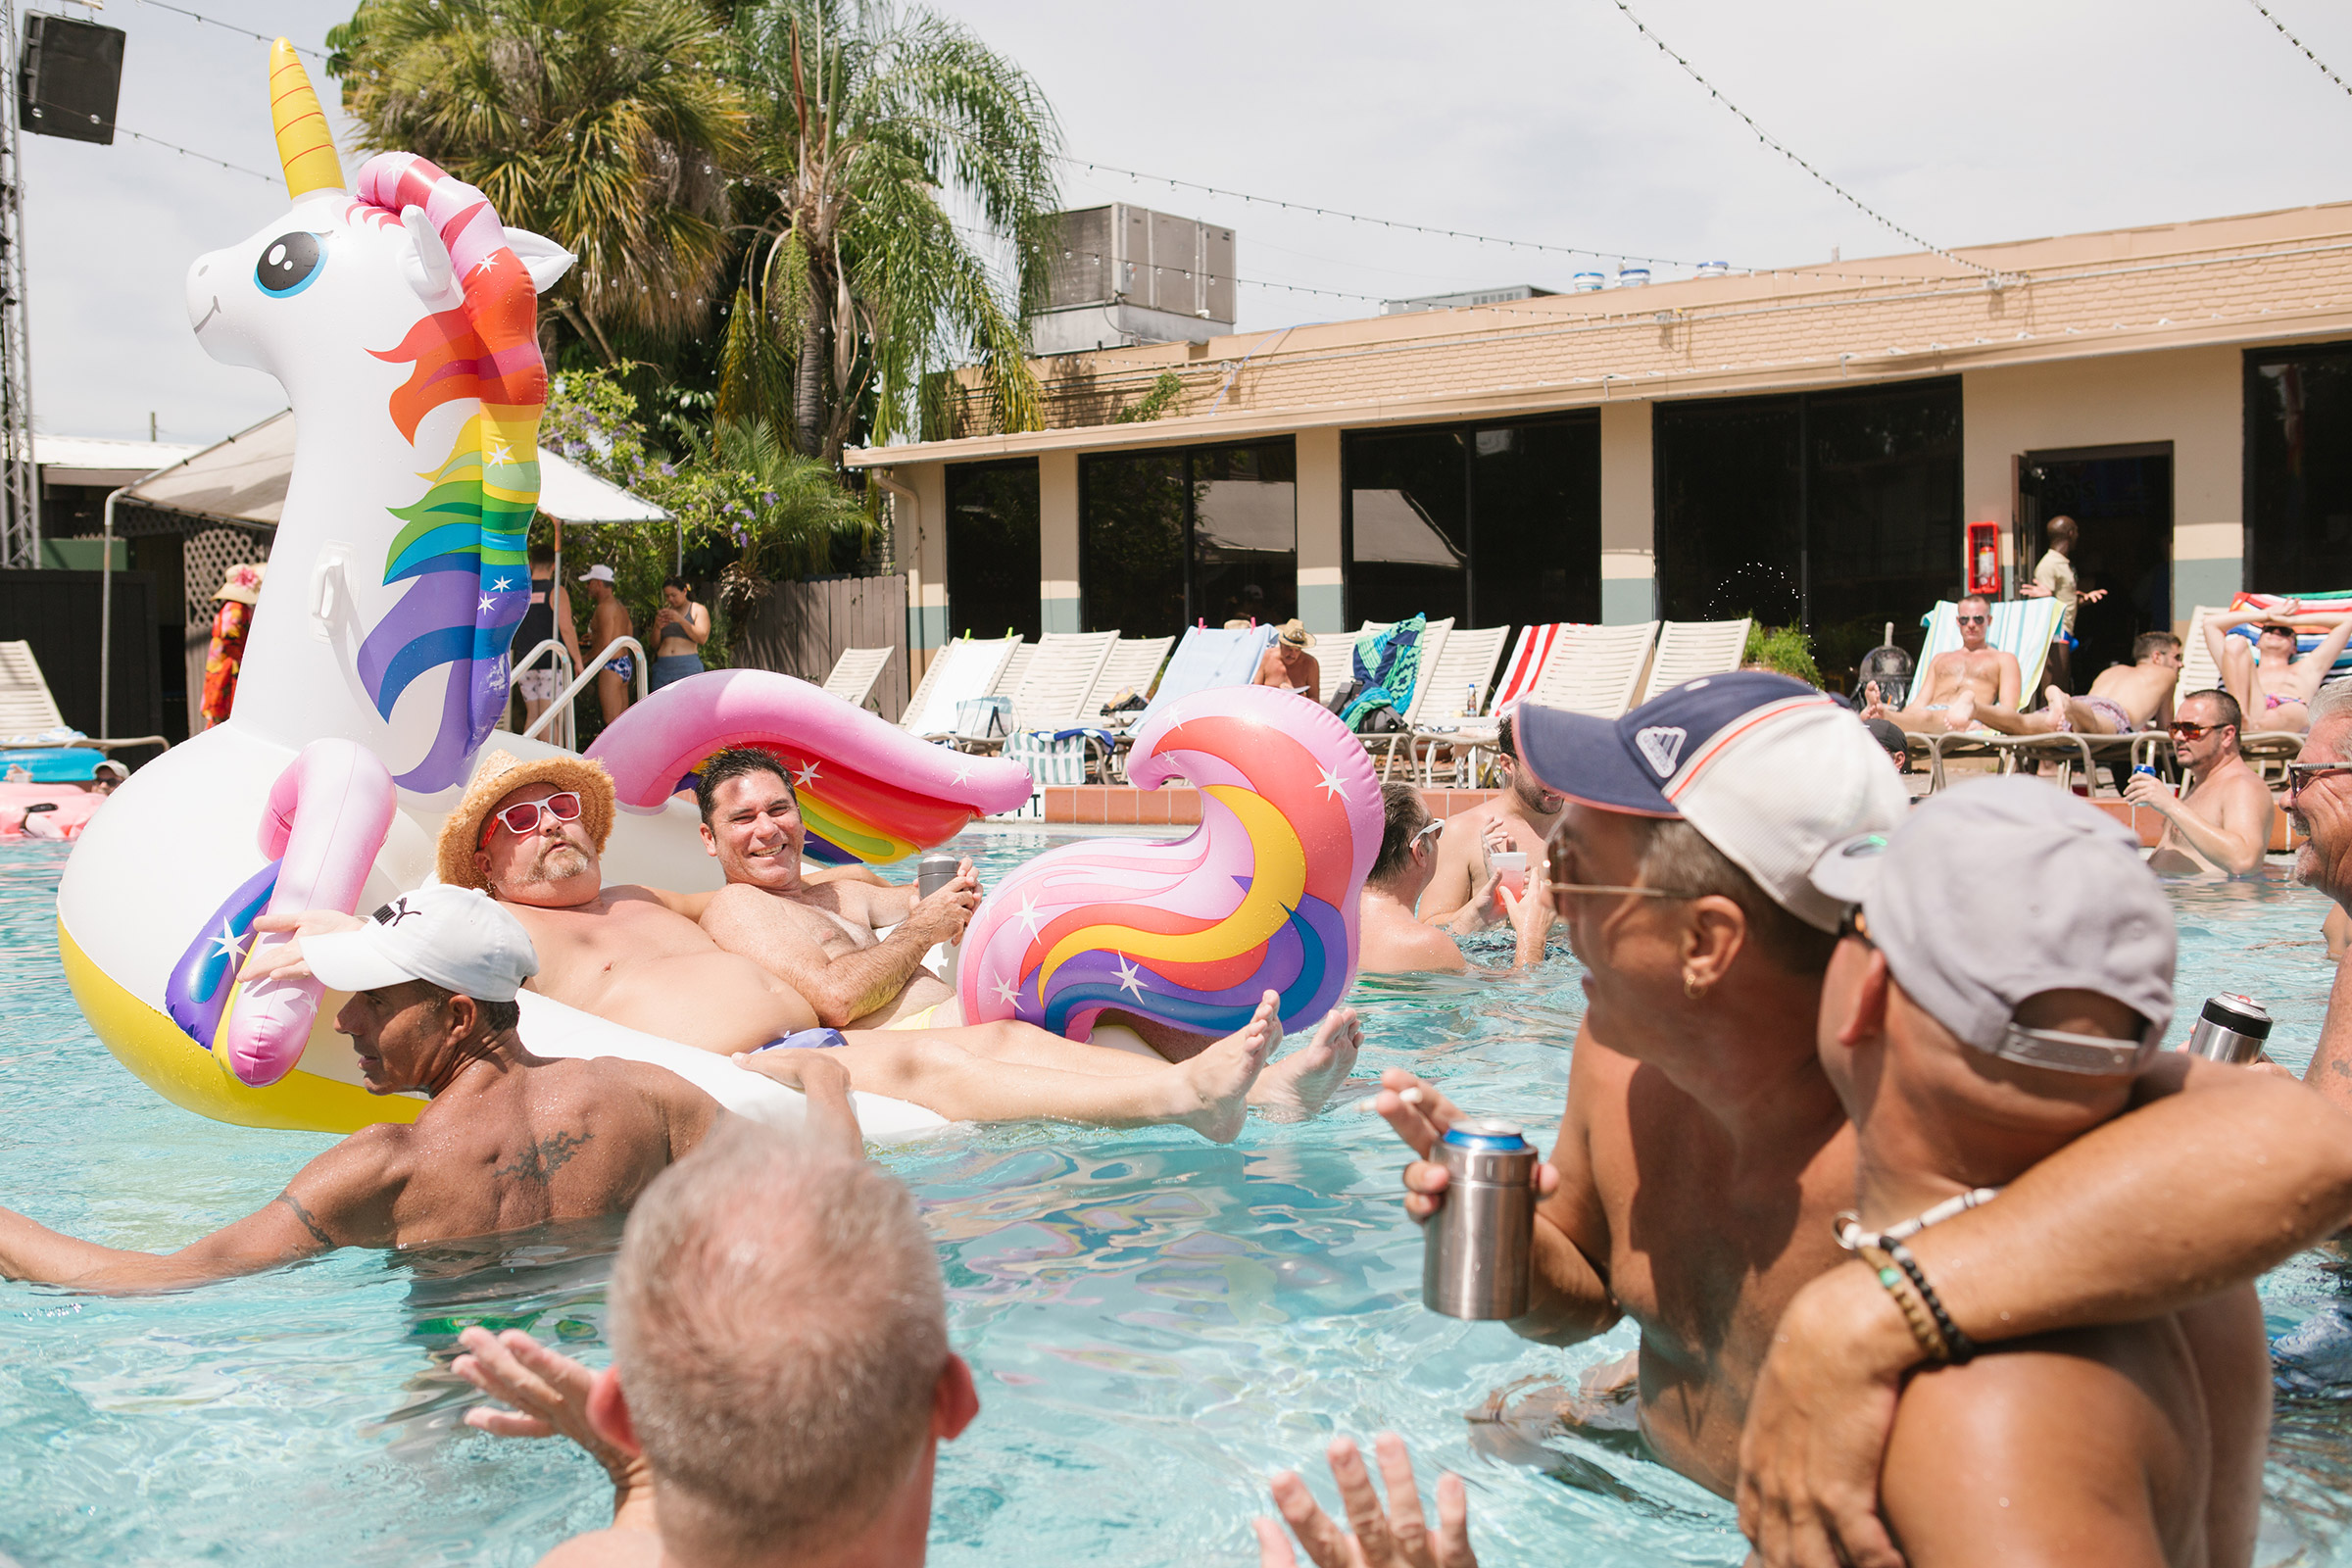 Allen, second from right, and others at a pool party at Parliament House, Orlando's iconic 44-year-old LGBTQ resort that includes several bars, hotel rooms, nightclub and restaurant, on June 22. (Alicia Vera for TIME)